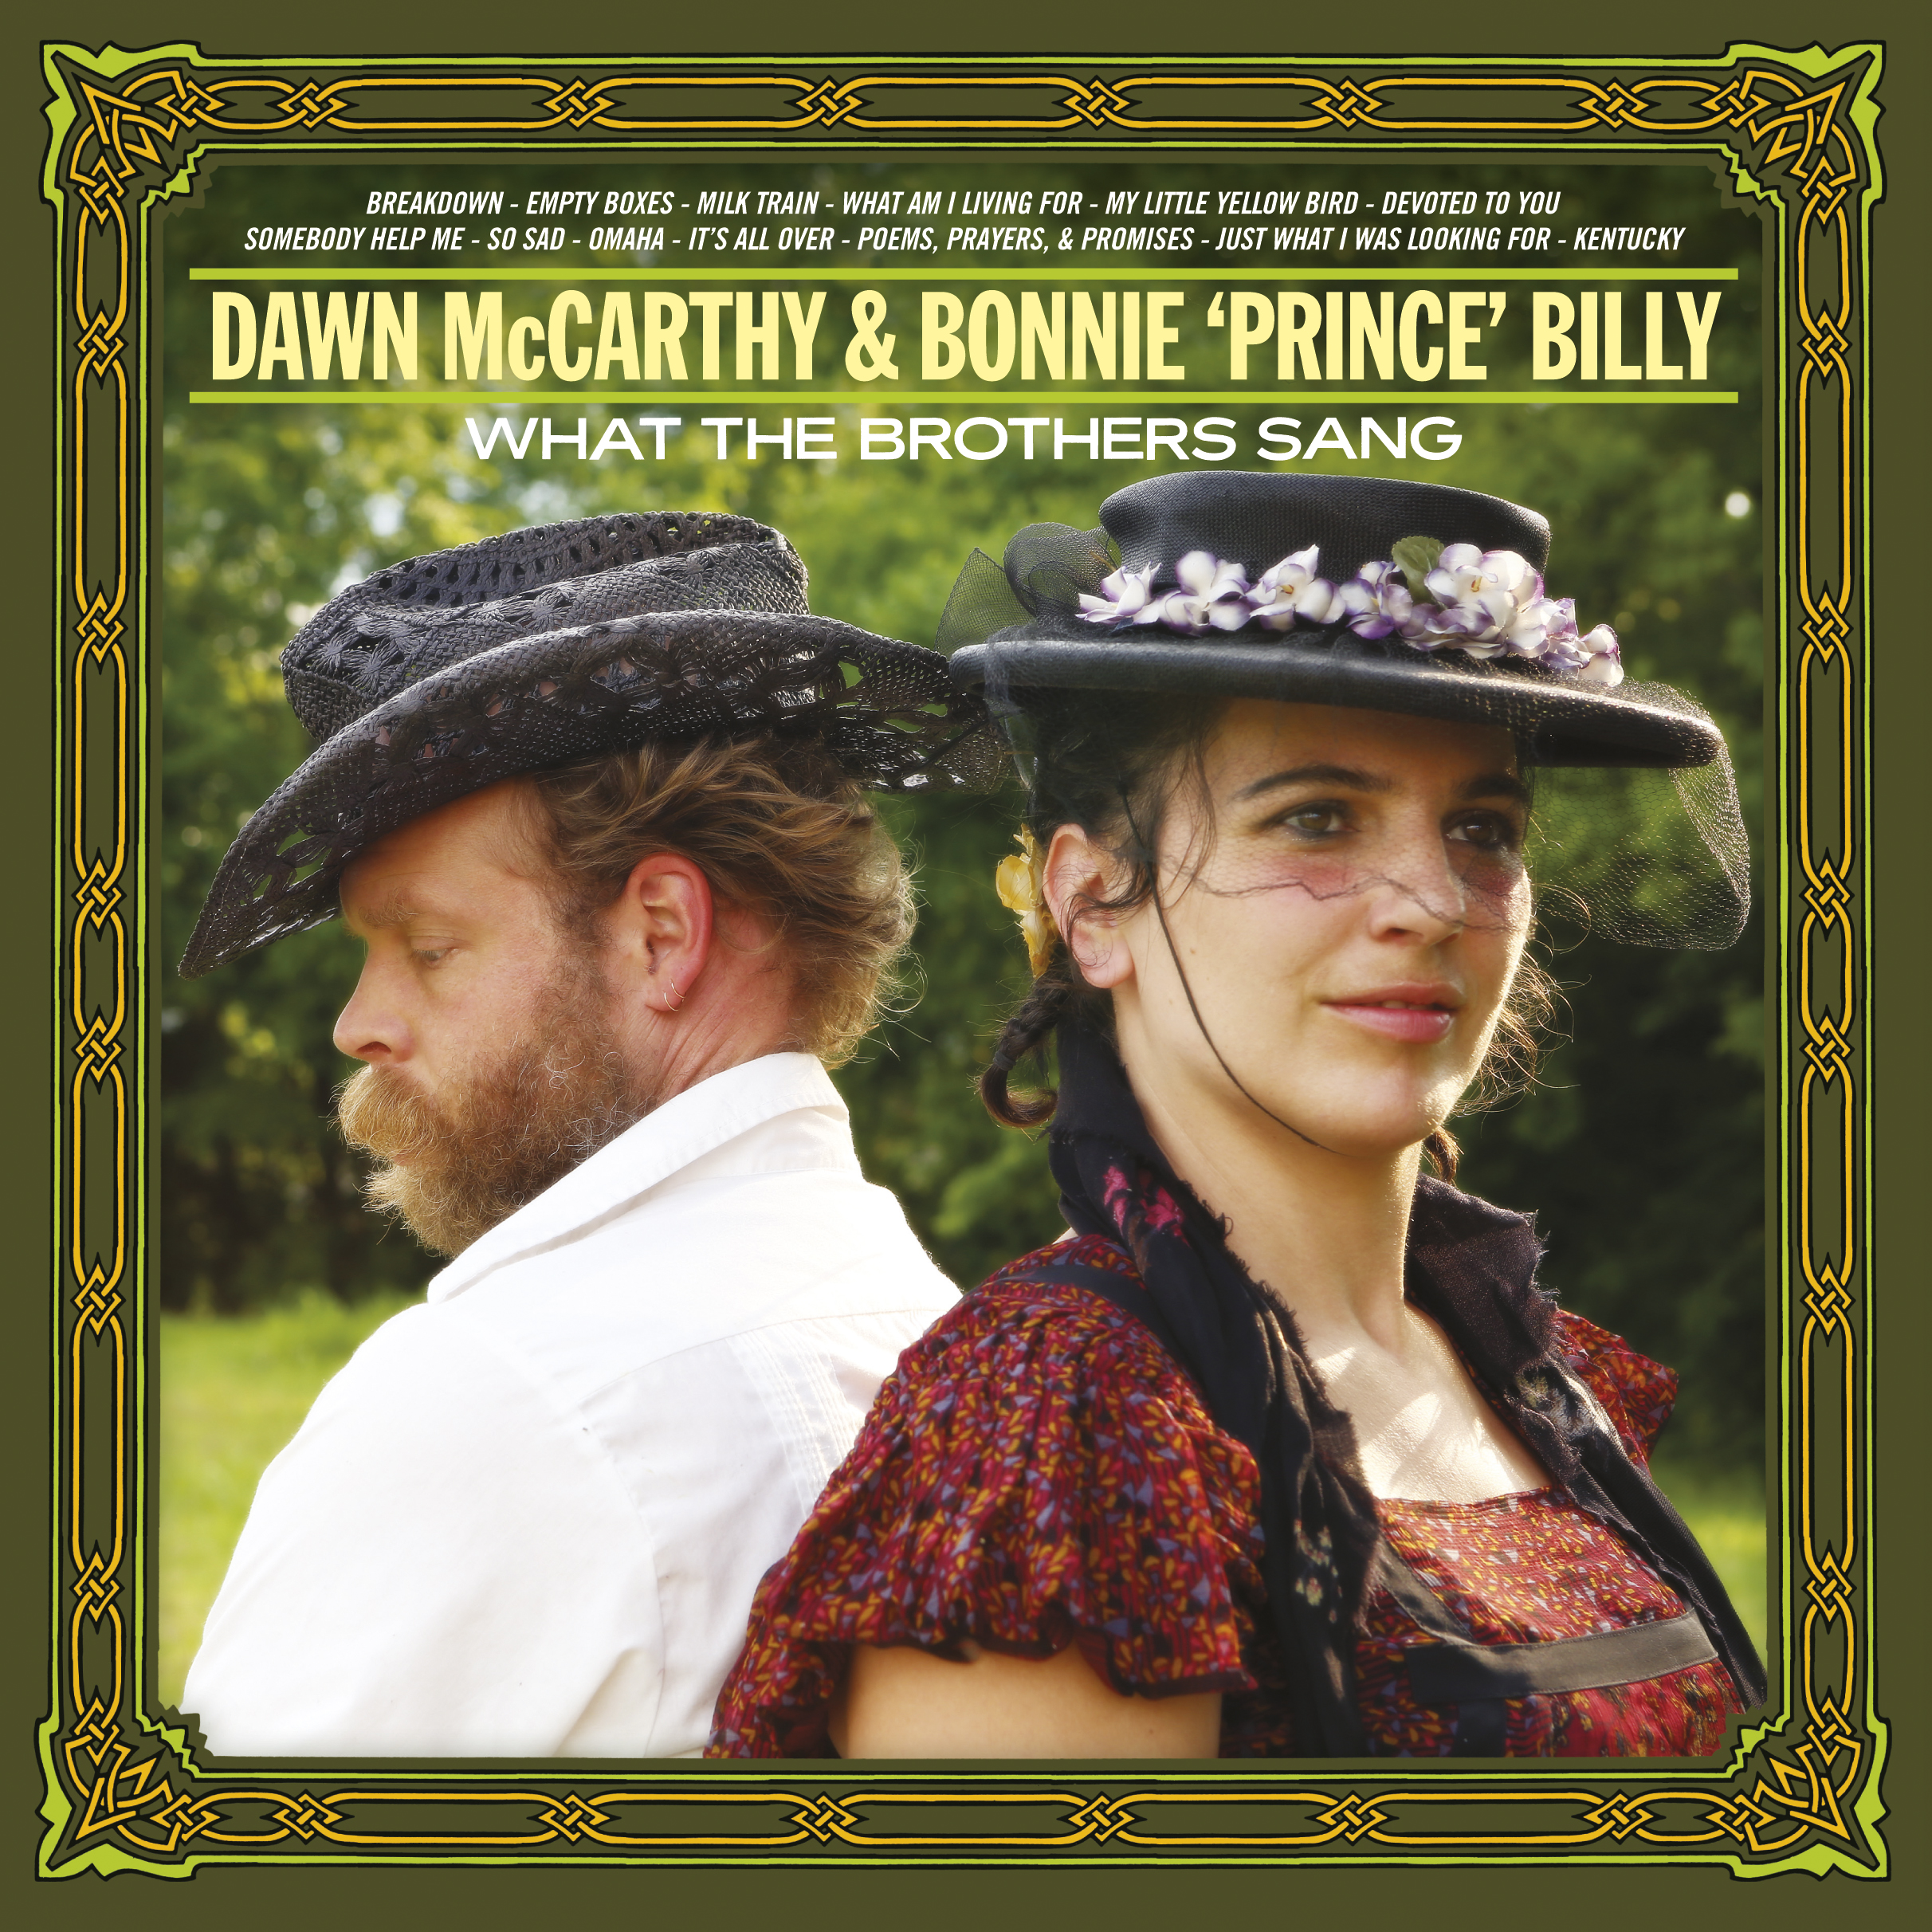 Dawn McCarthy & Bonnie 'Prince' Billy - What The Brothers Sang